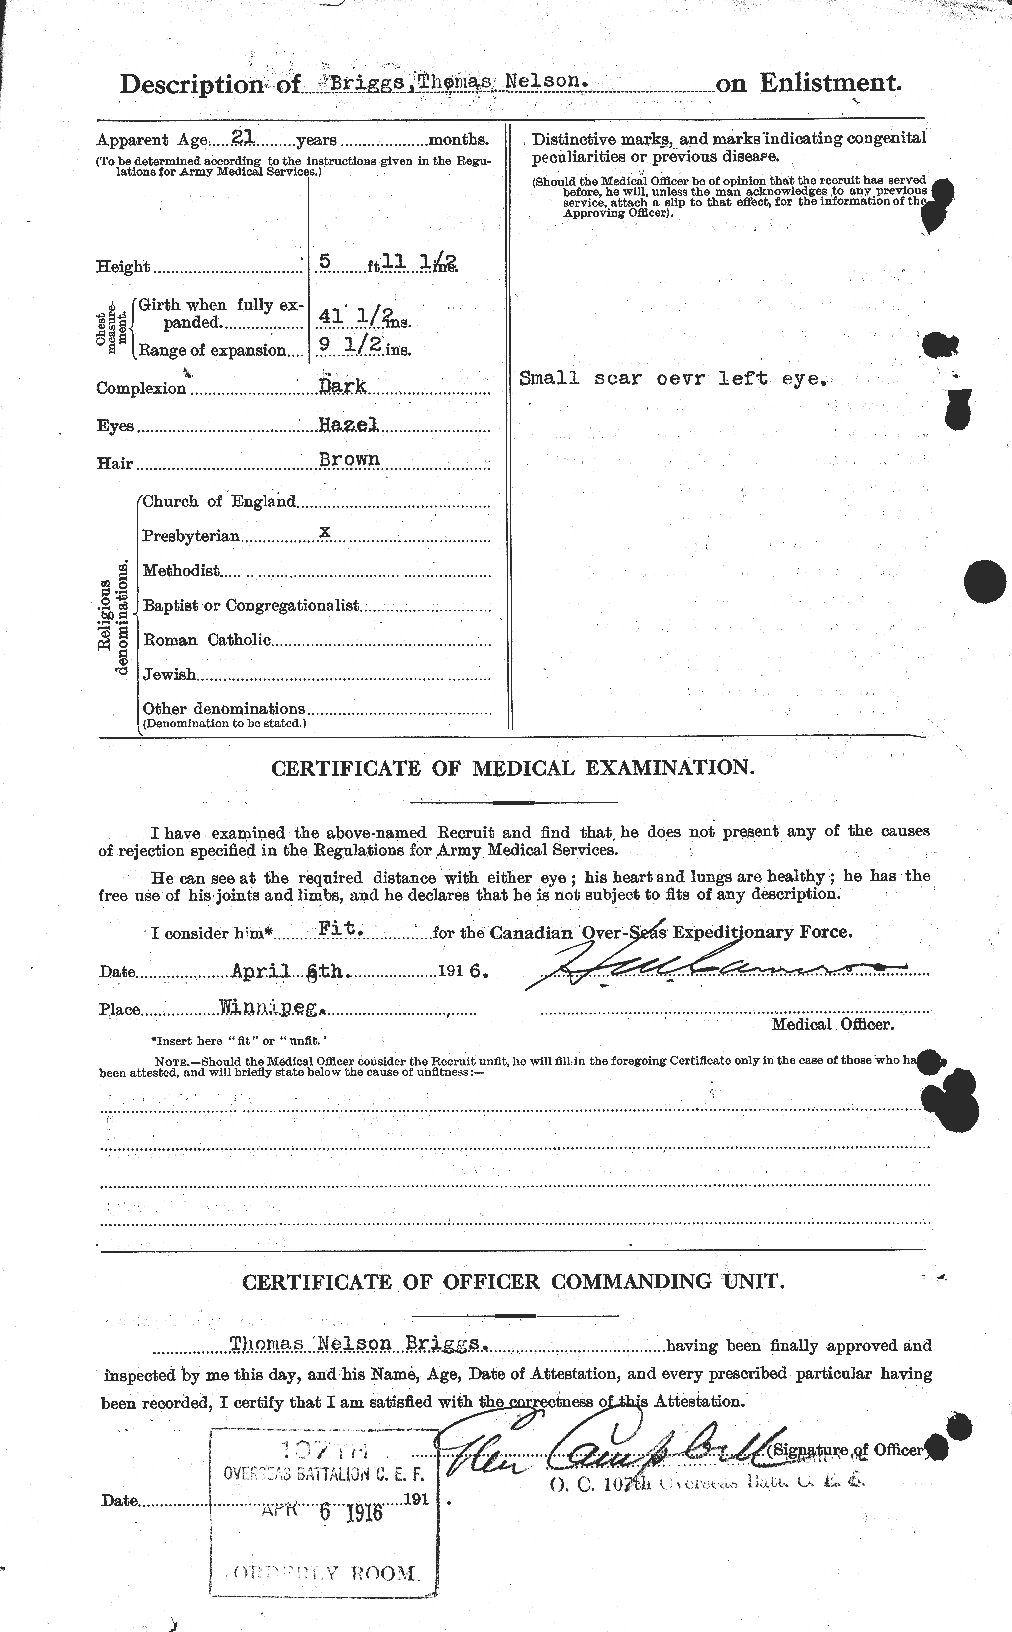 Personnel Records of the First World War - CEF 264106b